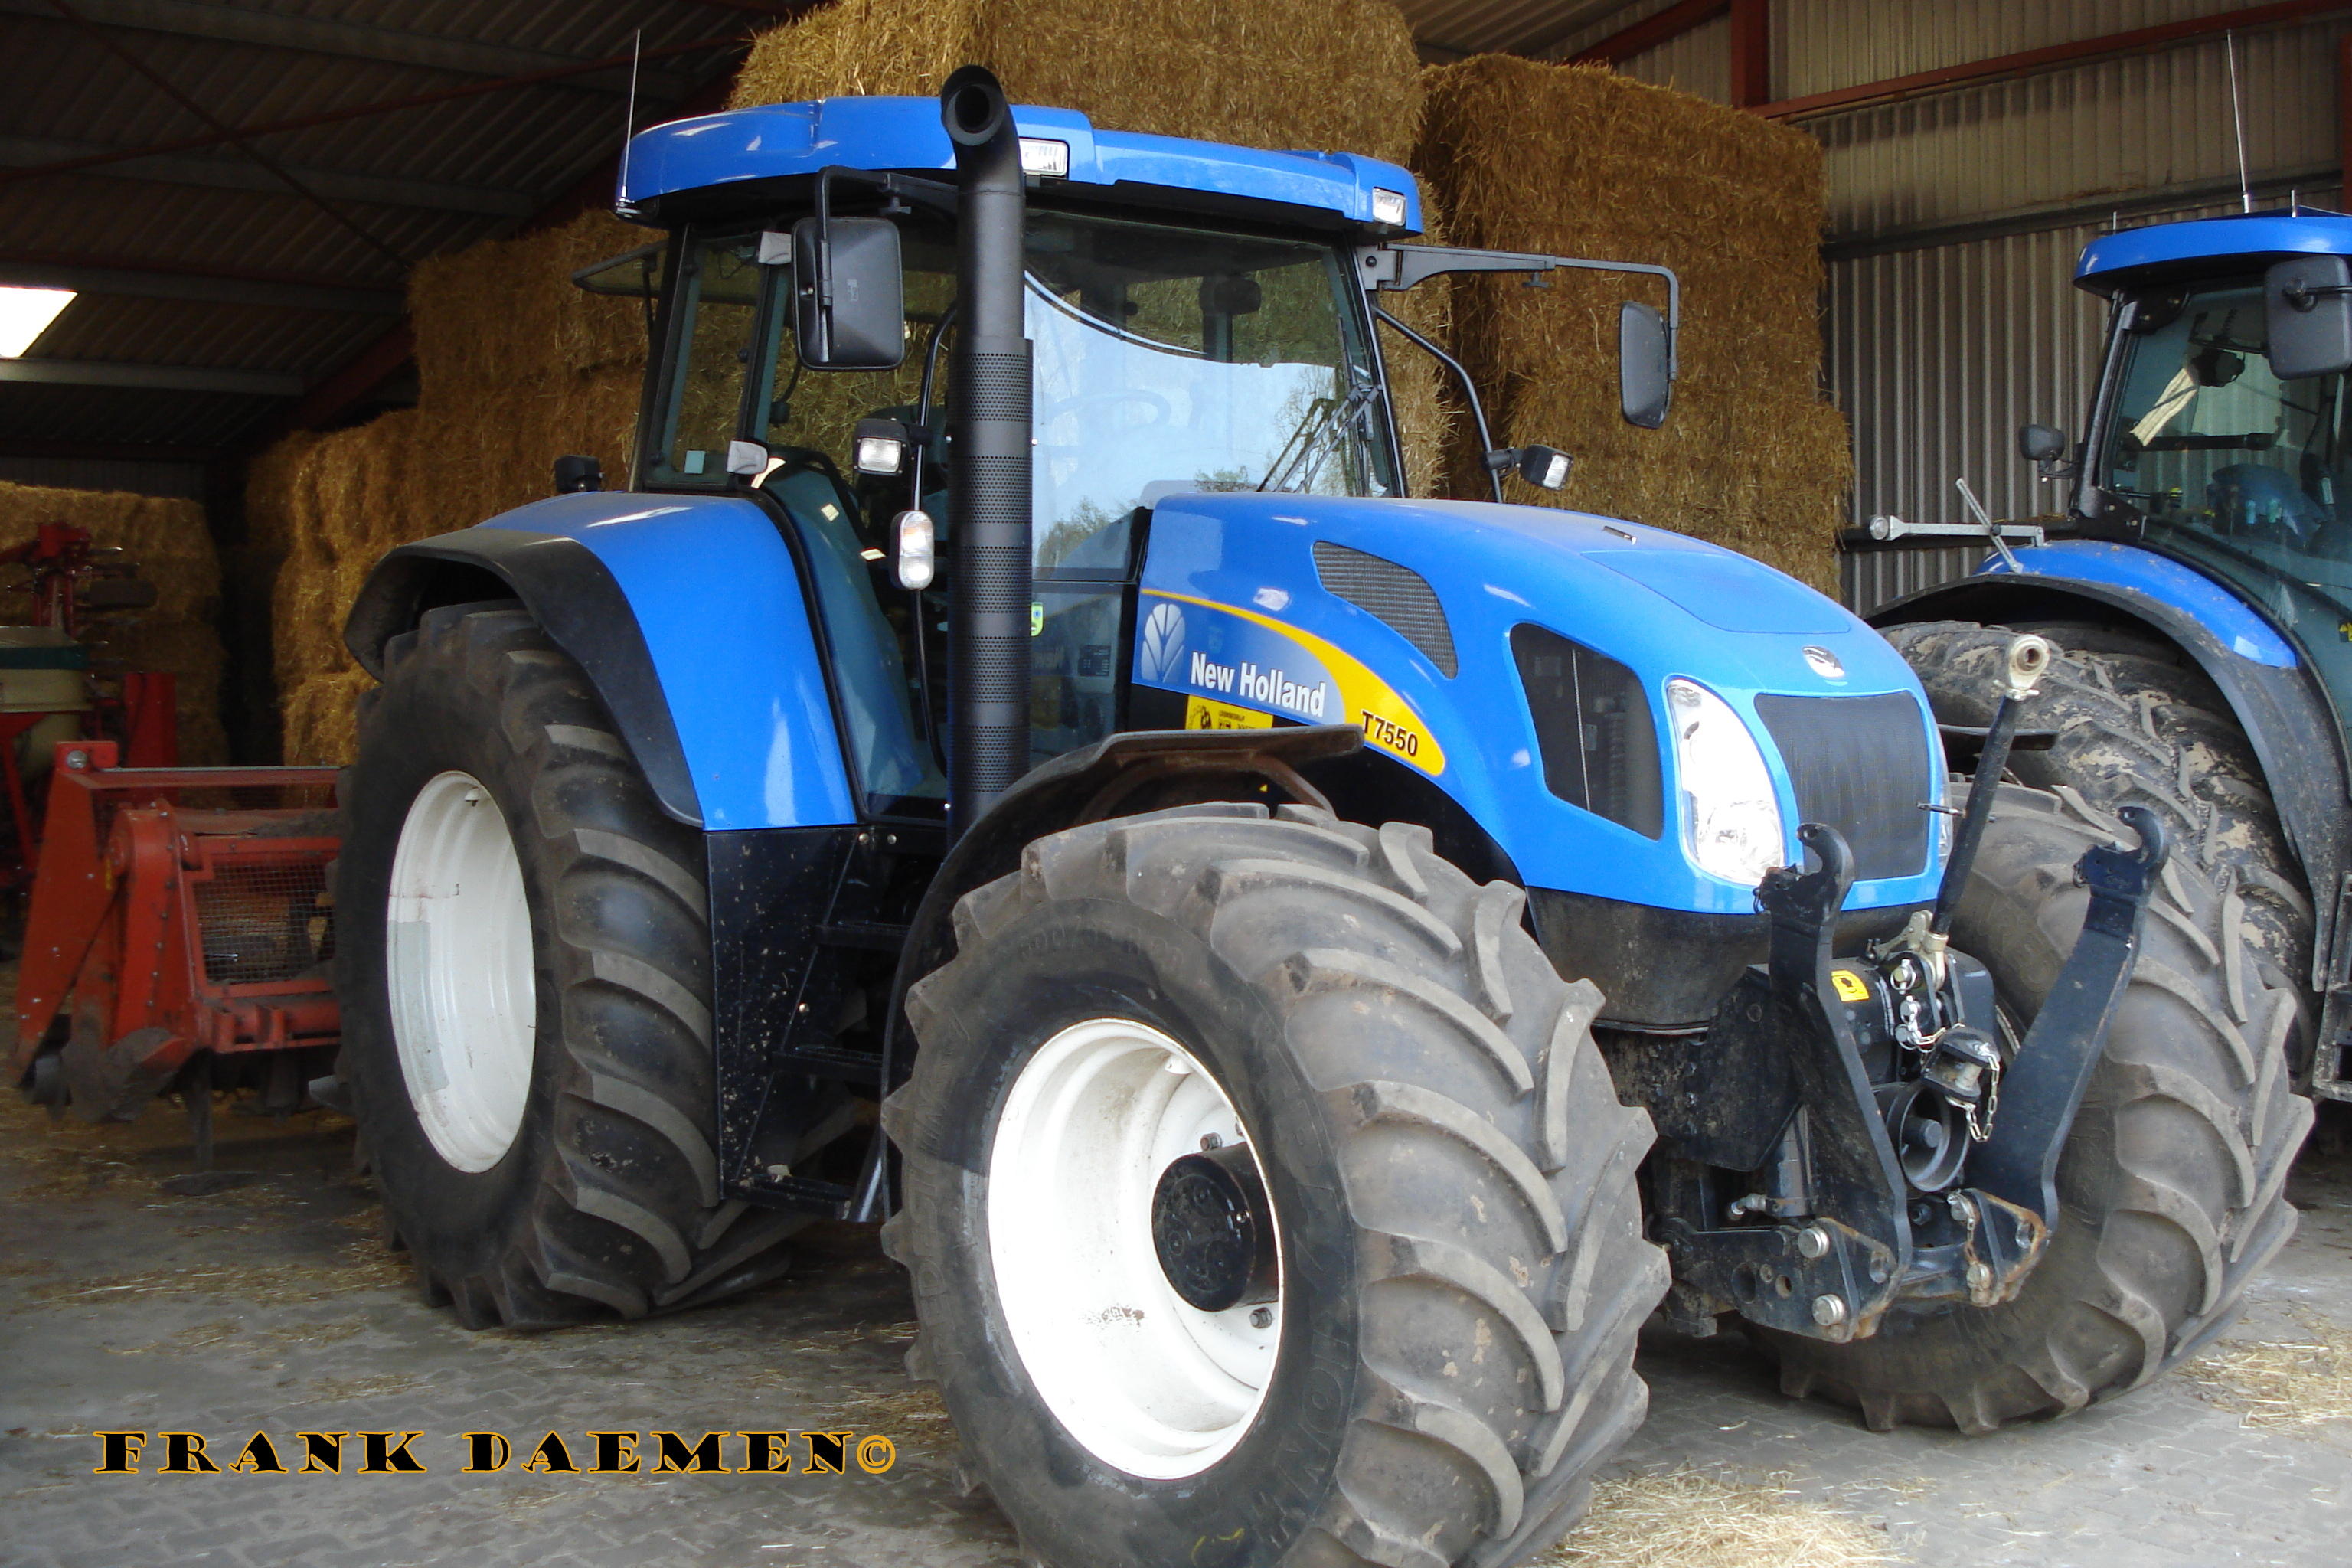 Support] New Holland T7550